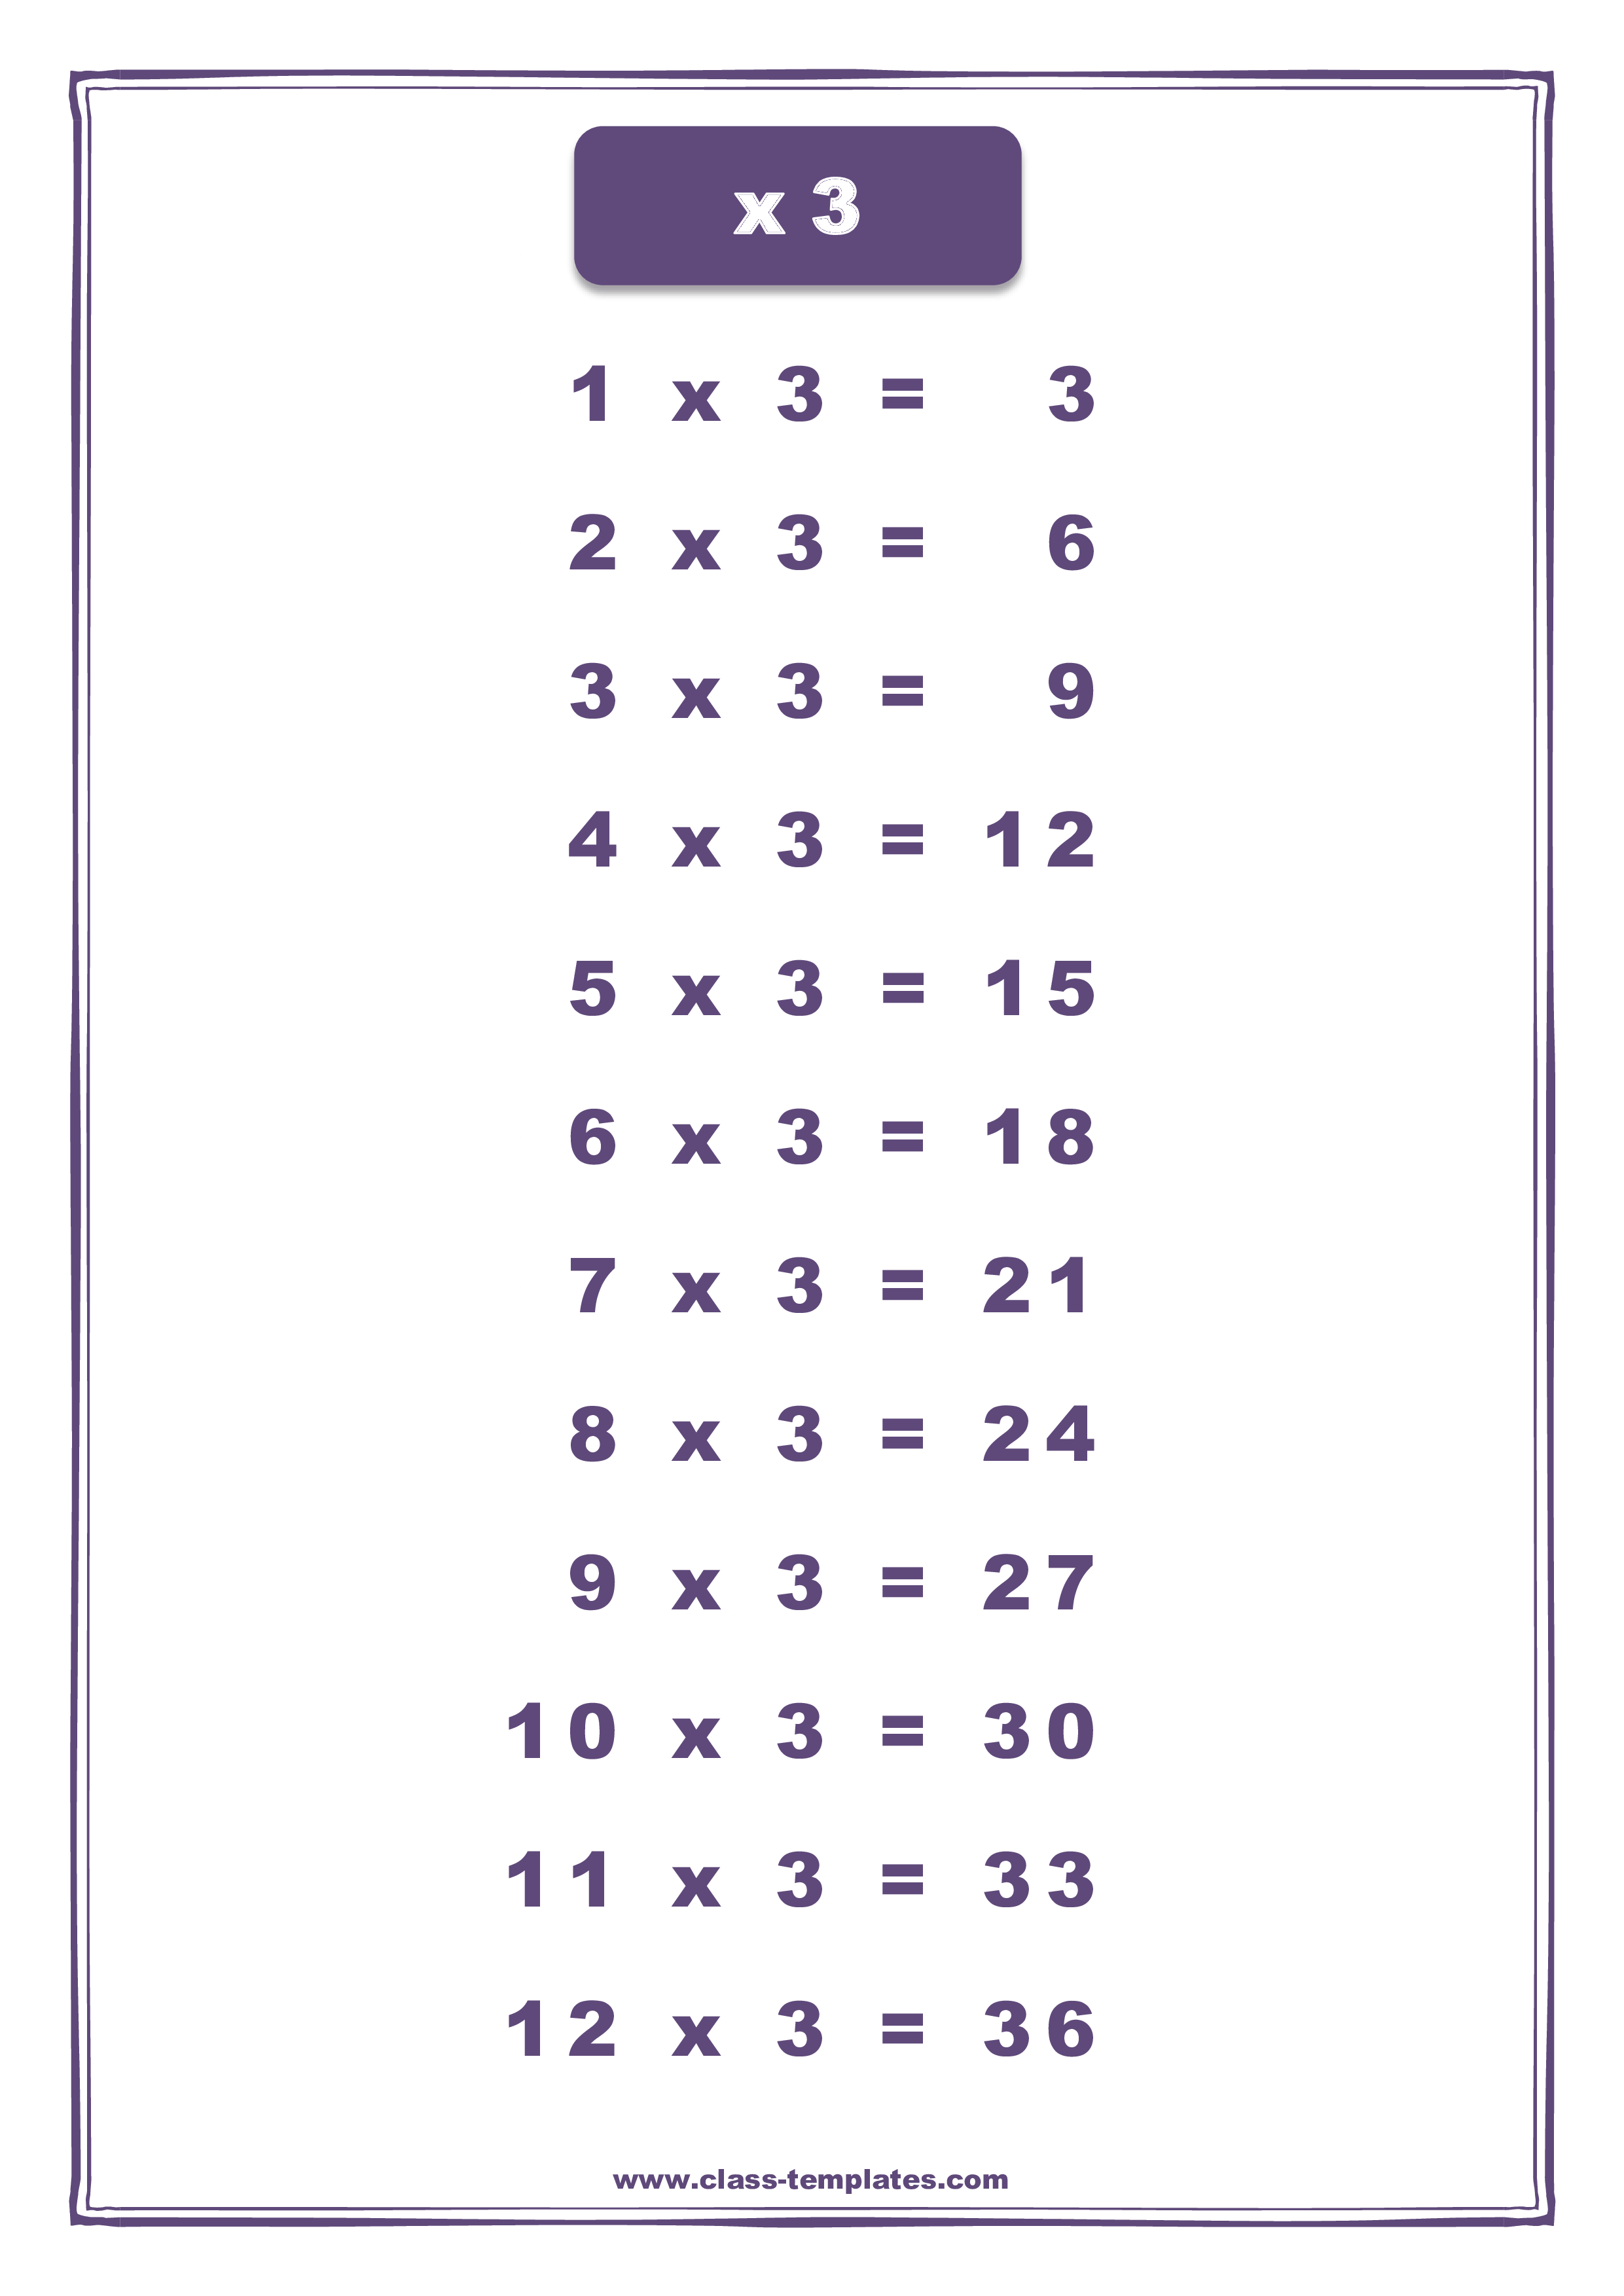 X3 Times Table Chart | Templates At Allbusinesstemplates